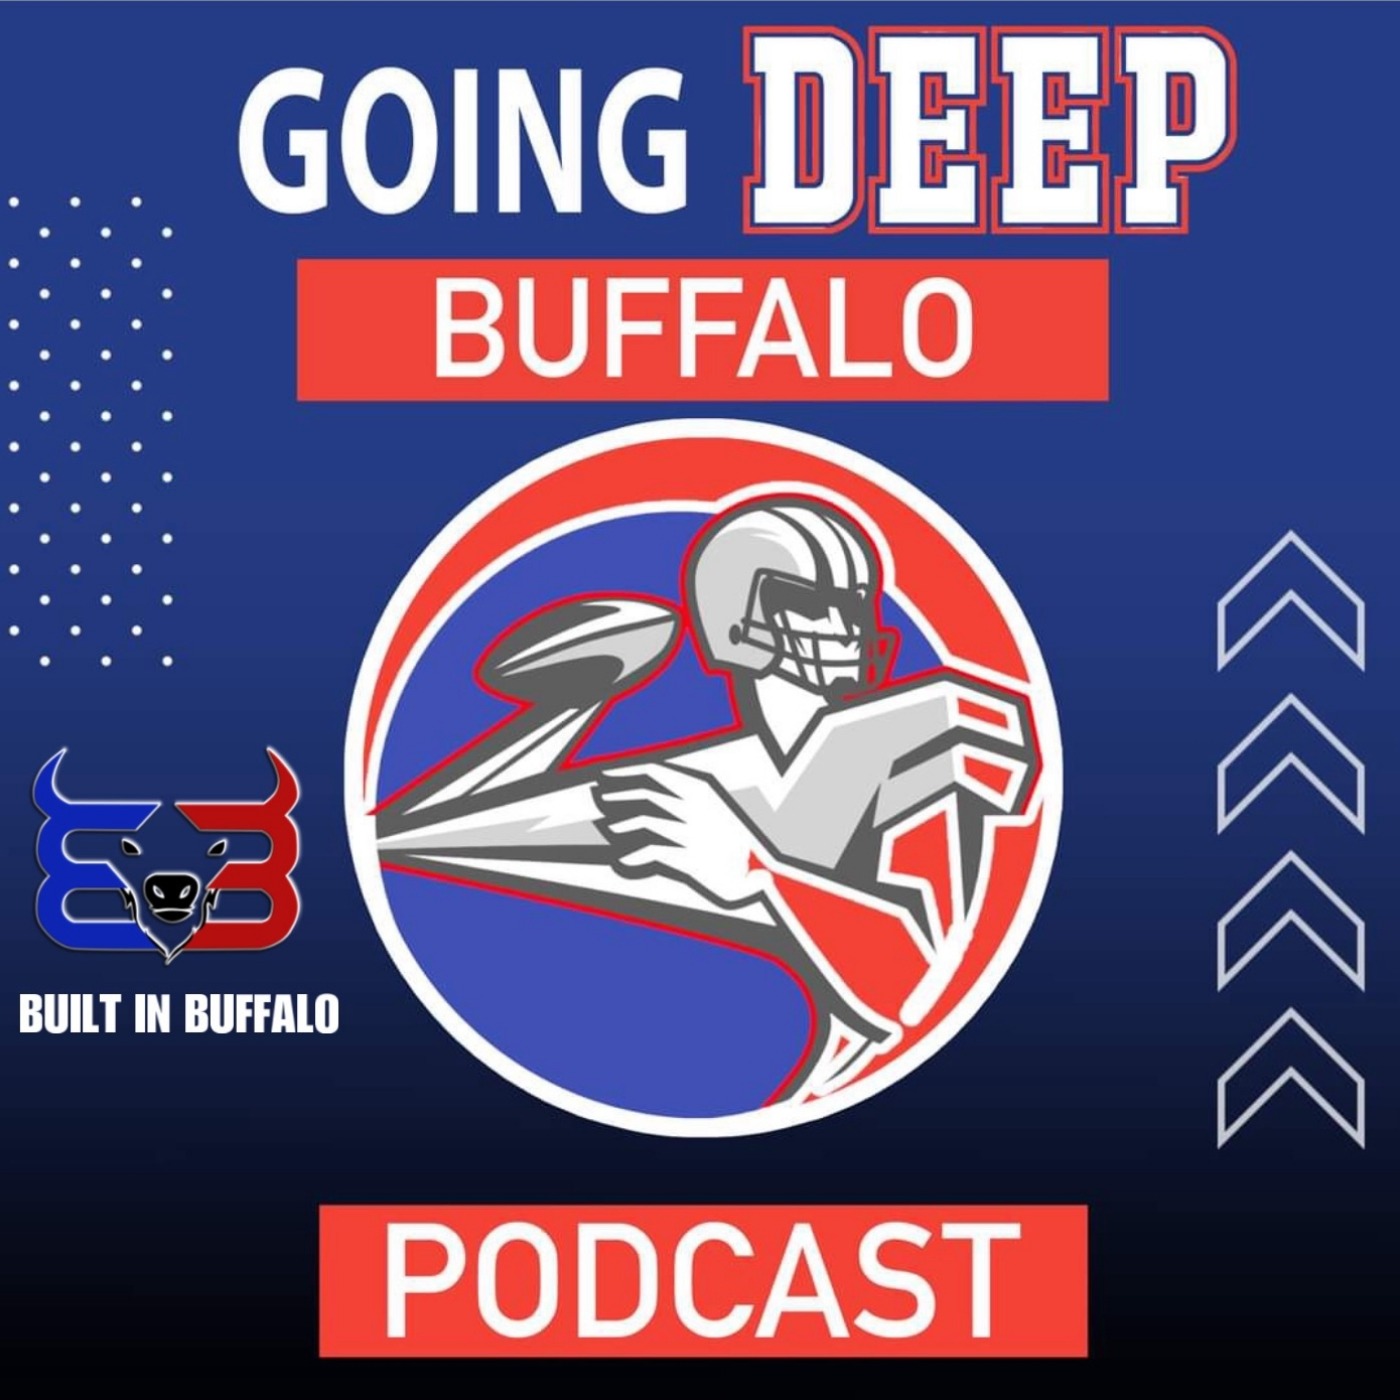 Episode 91 - The Bills Look For The #2 Seed In The NFL's Last Game